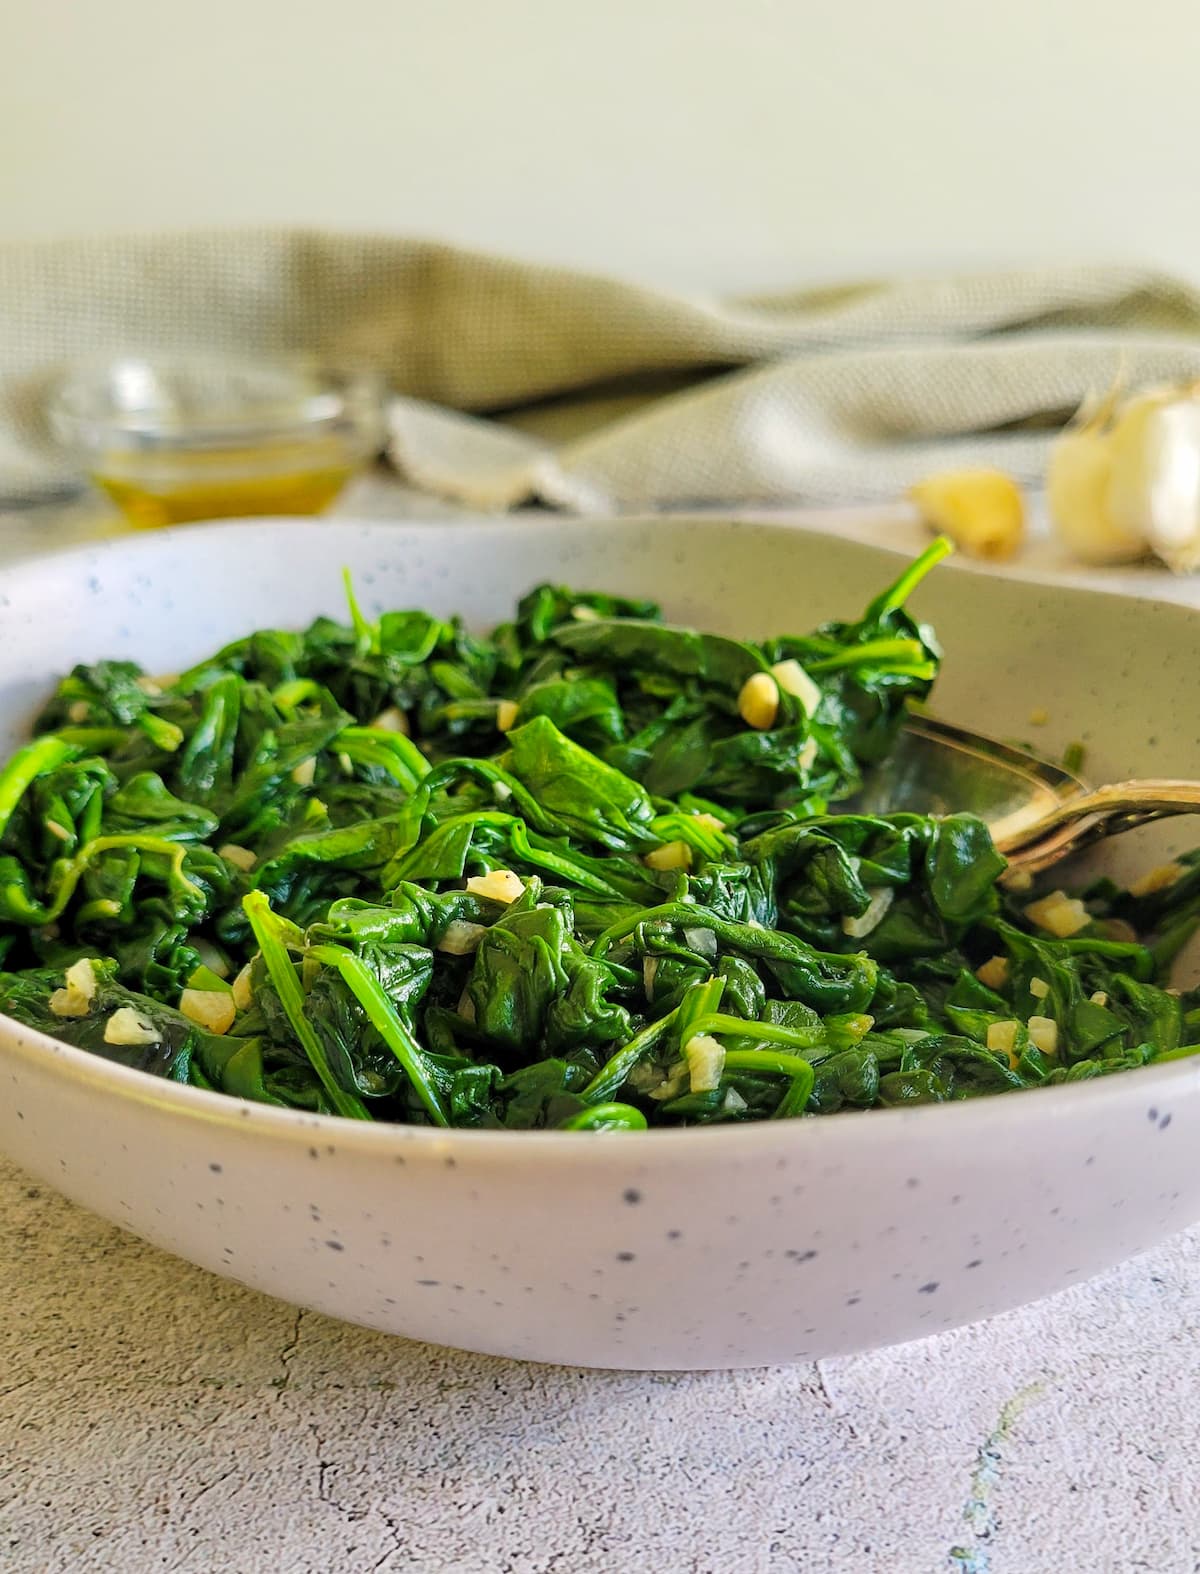 sauteed spinach and garlic in a bowl, olive oil and whole garlic cloves in the background